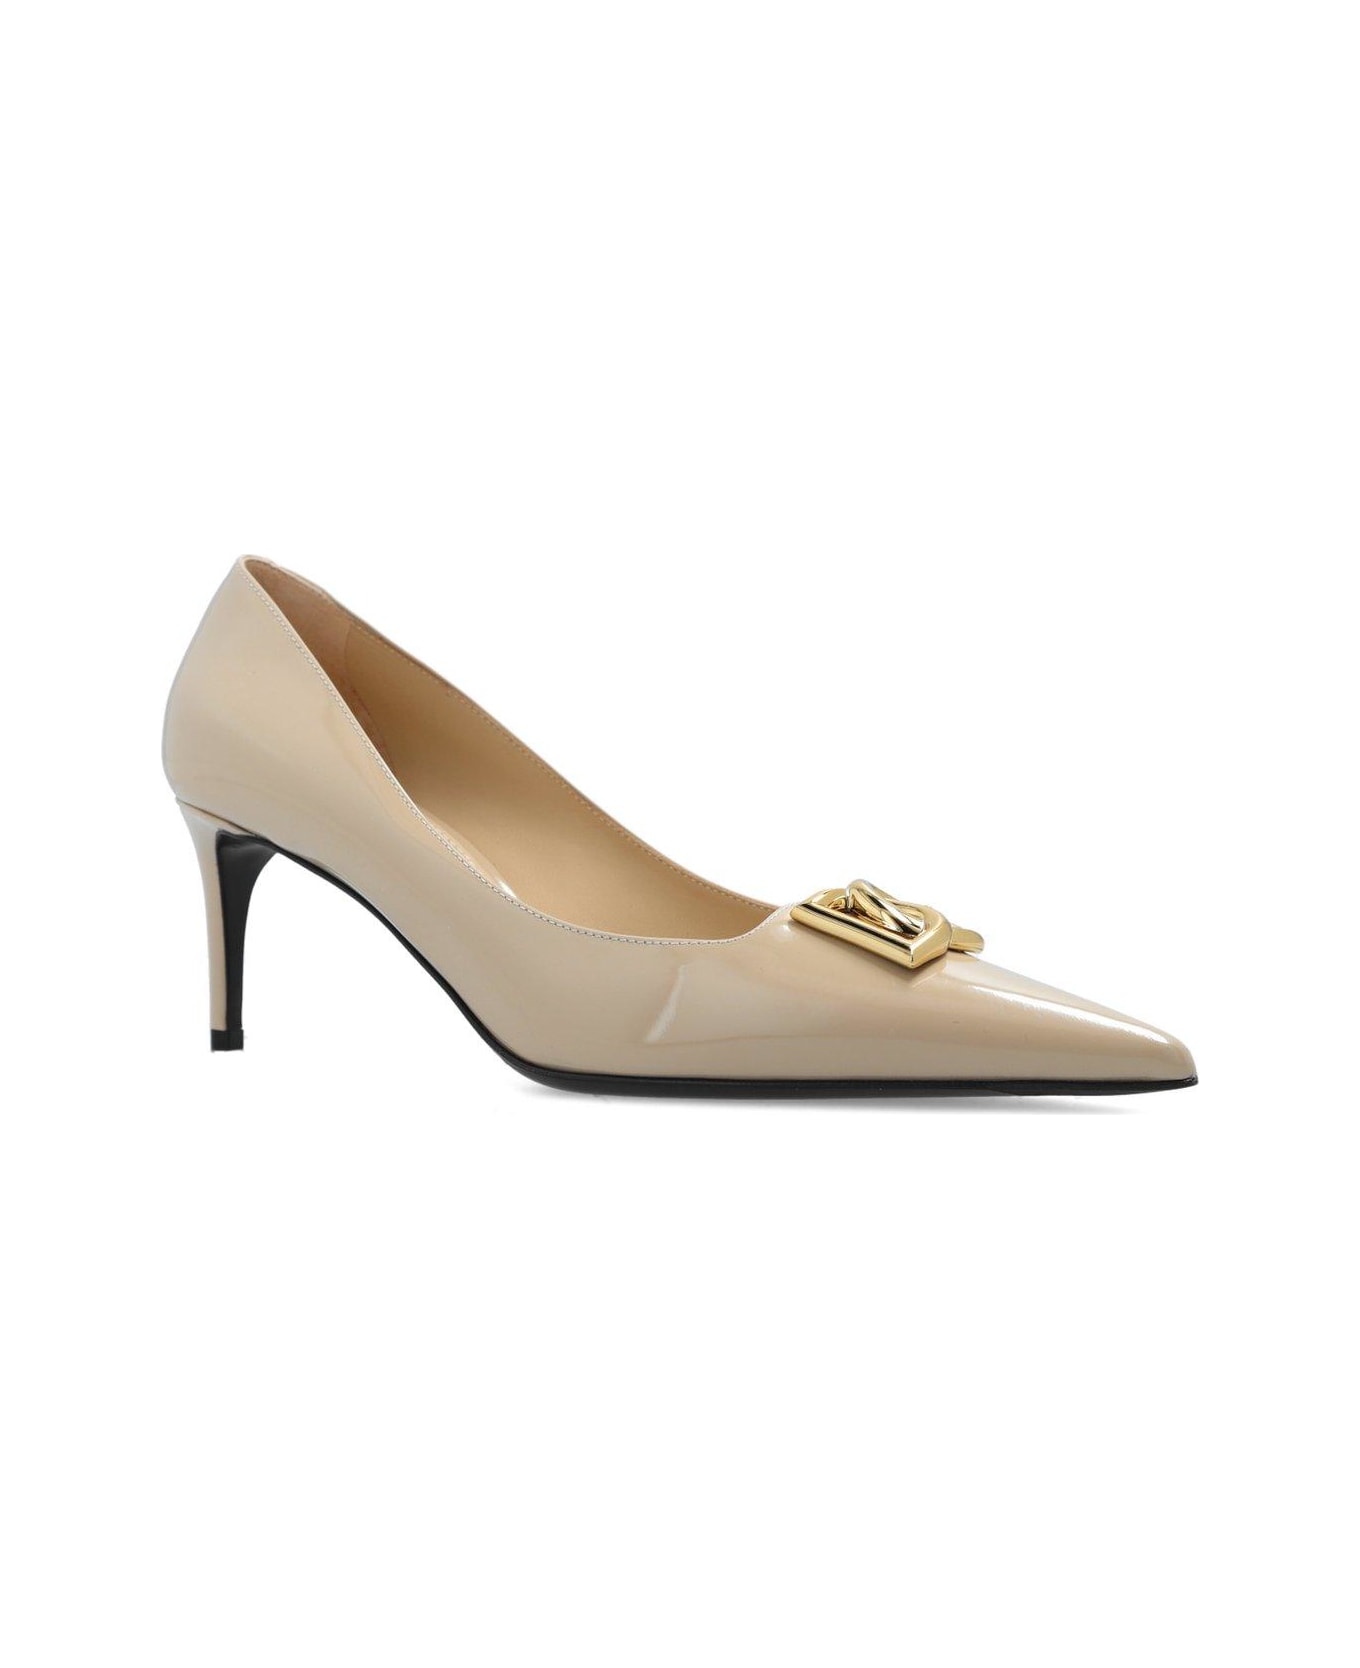 Dolce & Gabbana Dg Plaque Pointed Toe Pumps ハイヒール